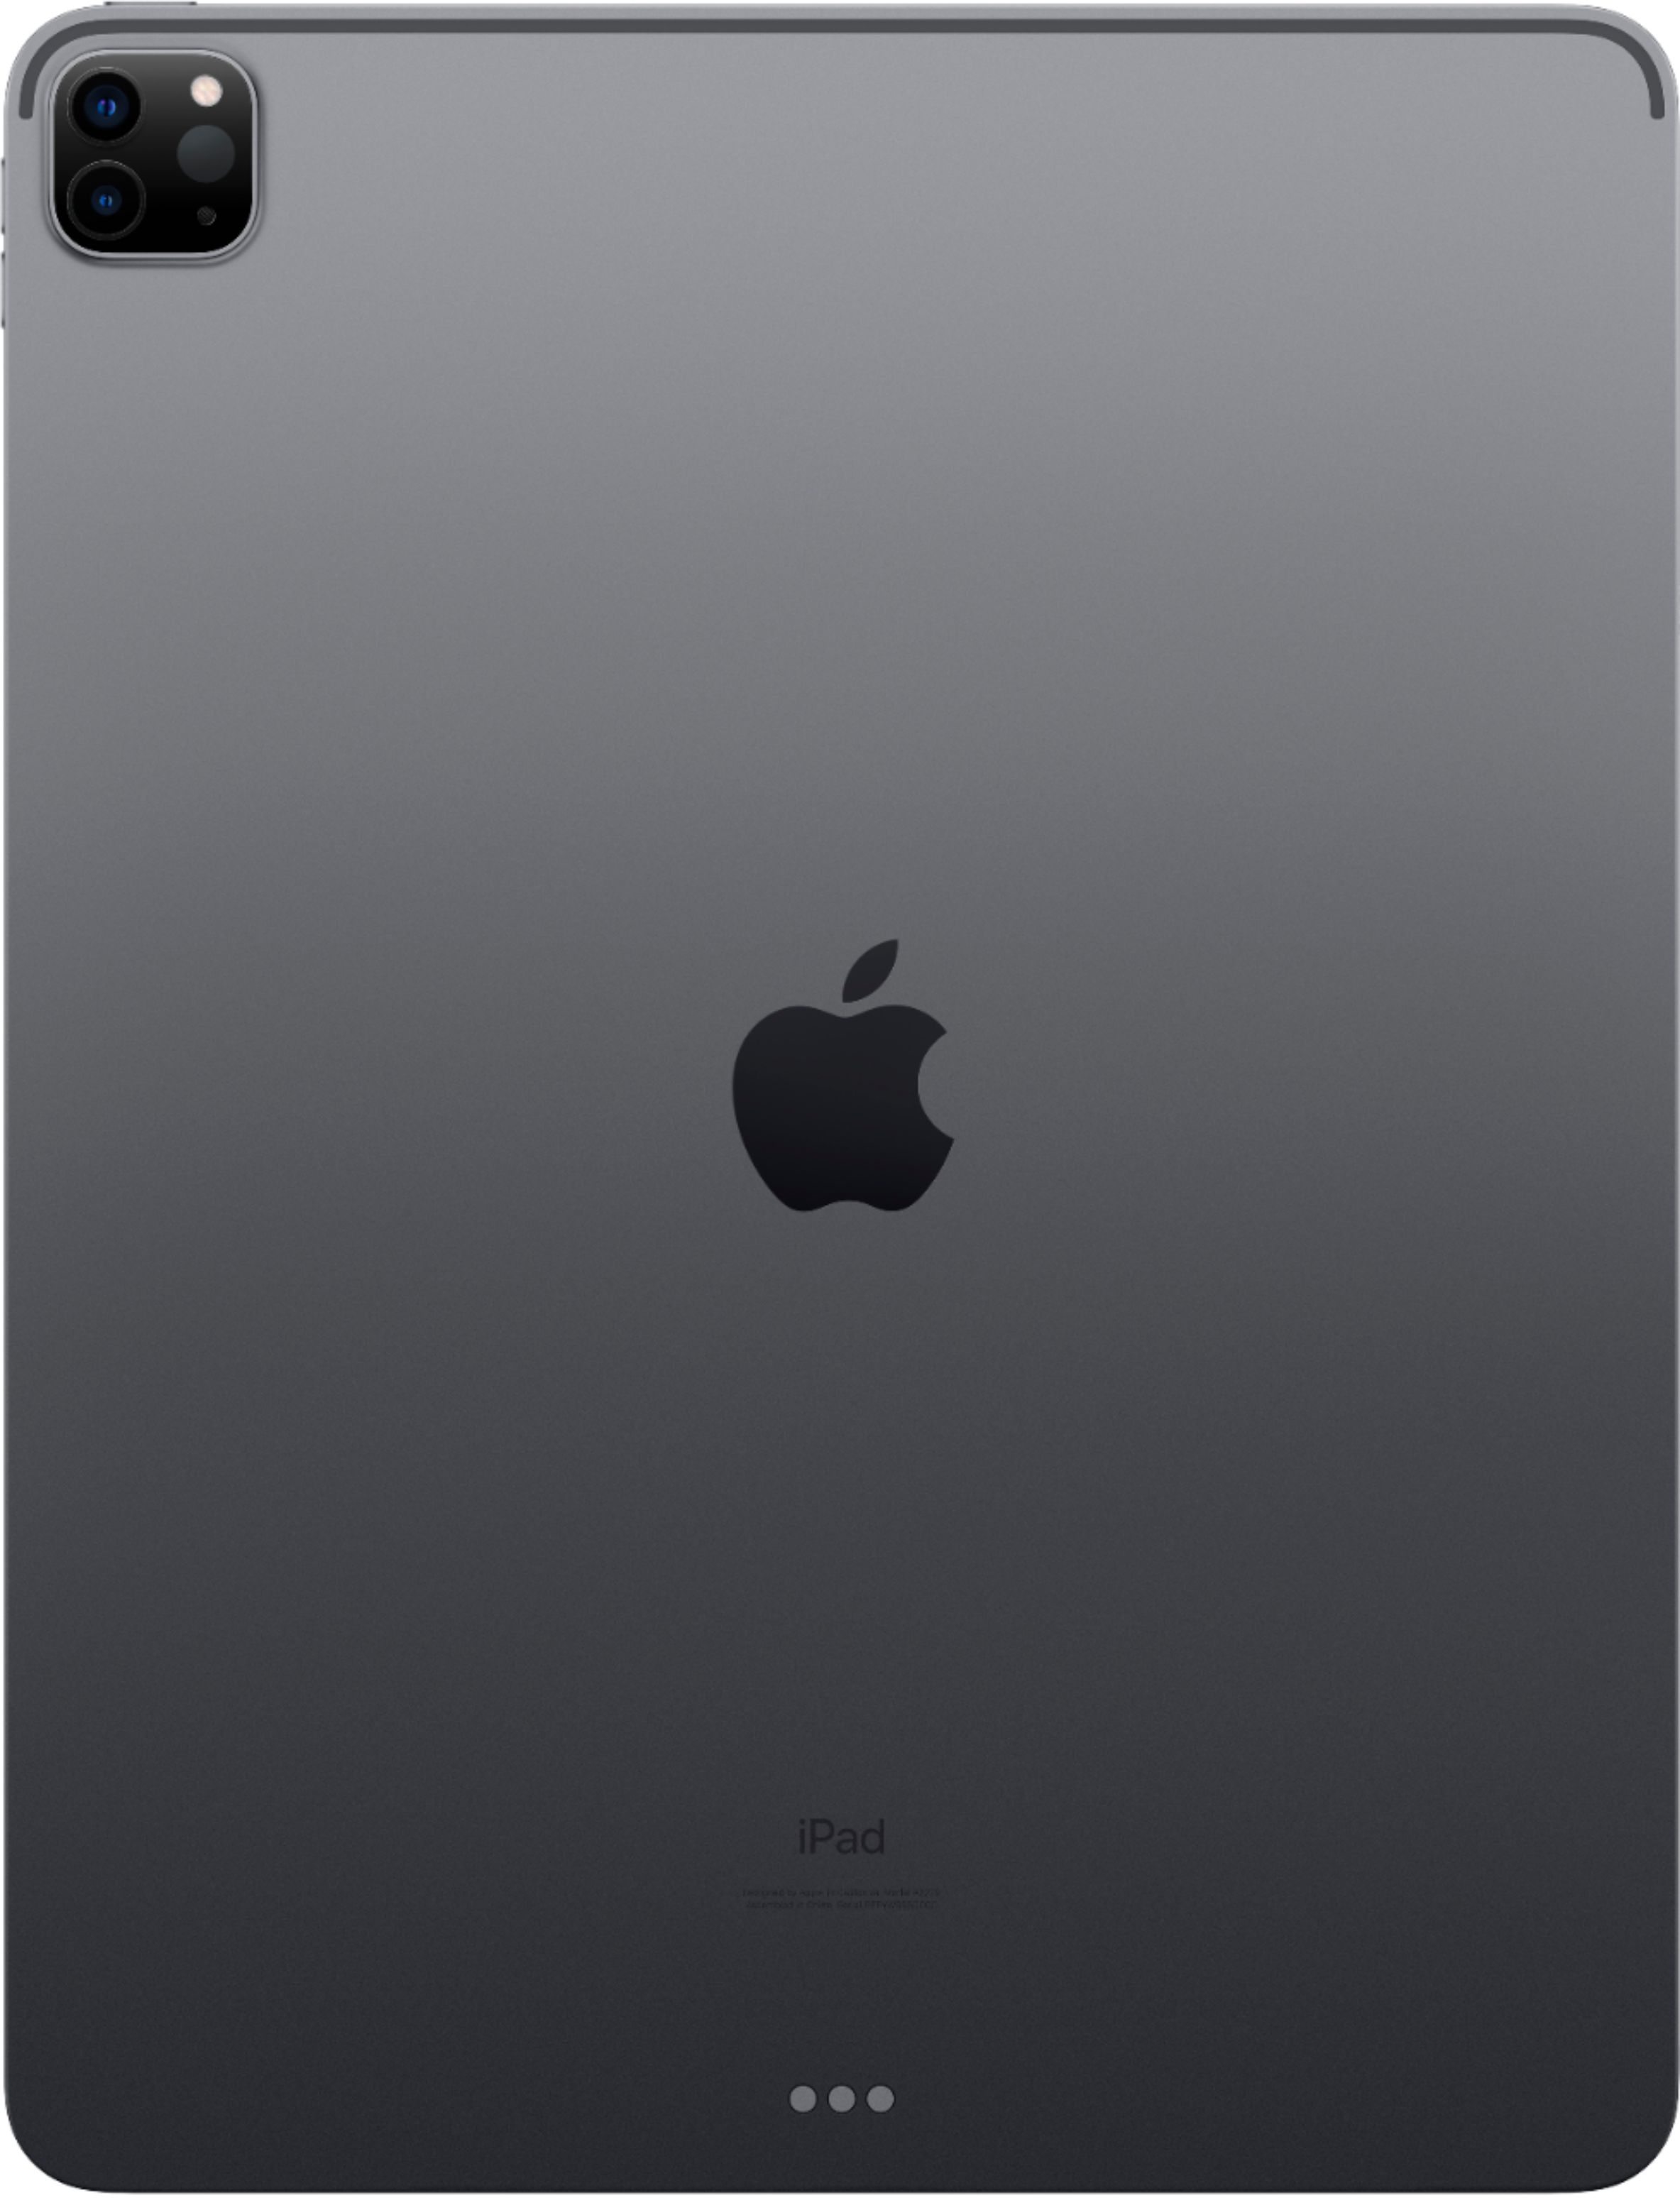 Best Buy Apple 12.9Inch iPad Pro (4th Generation) with WiFi